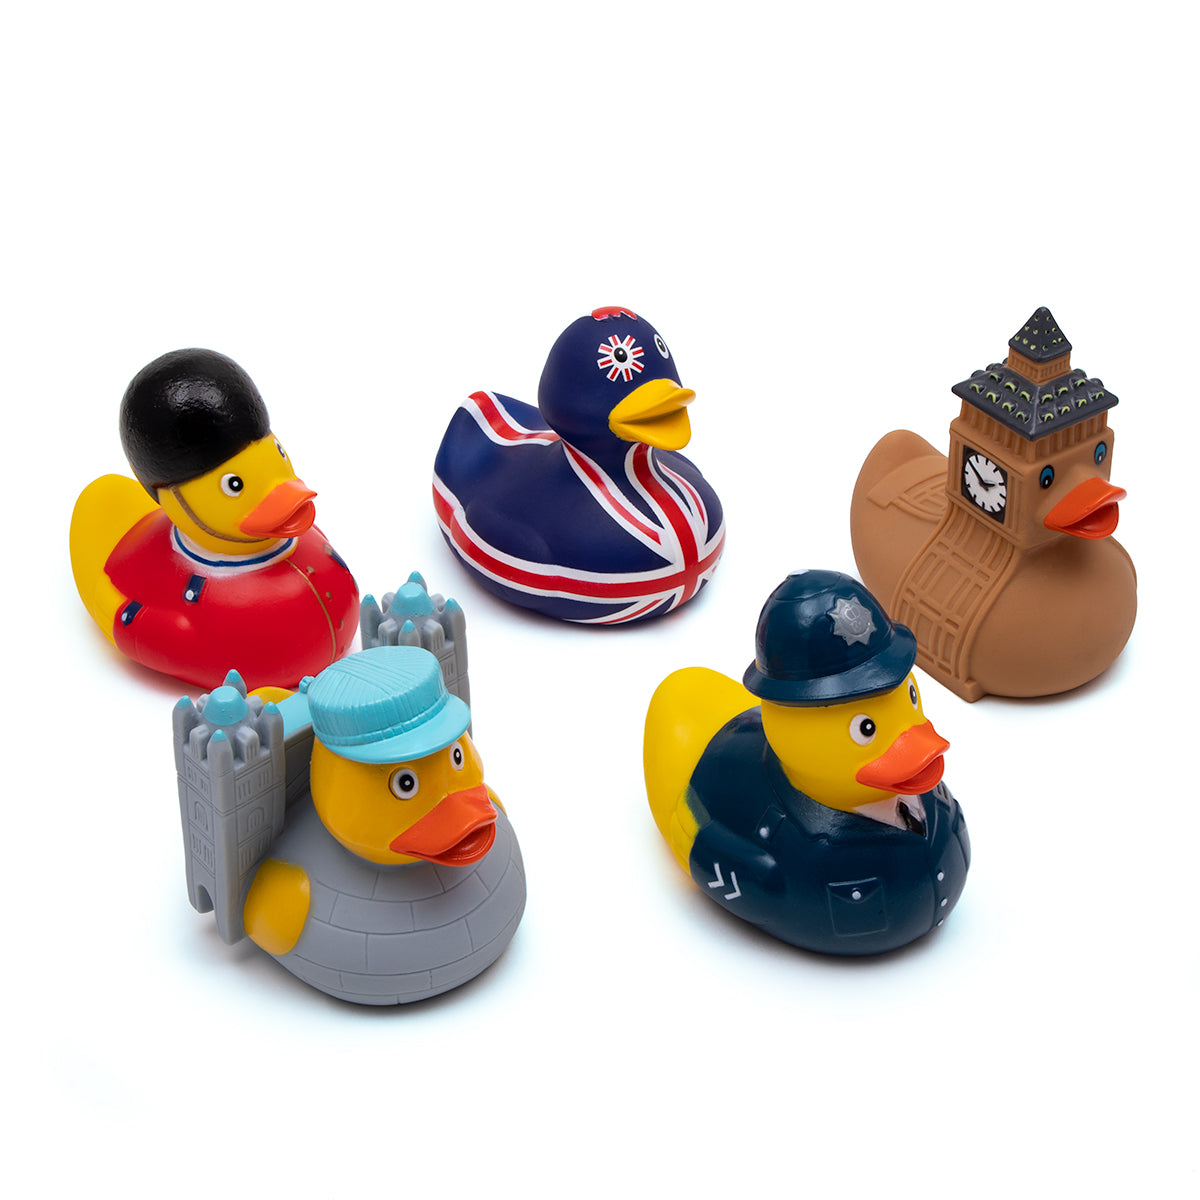 Rubber Ducks collection